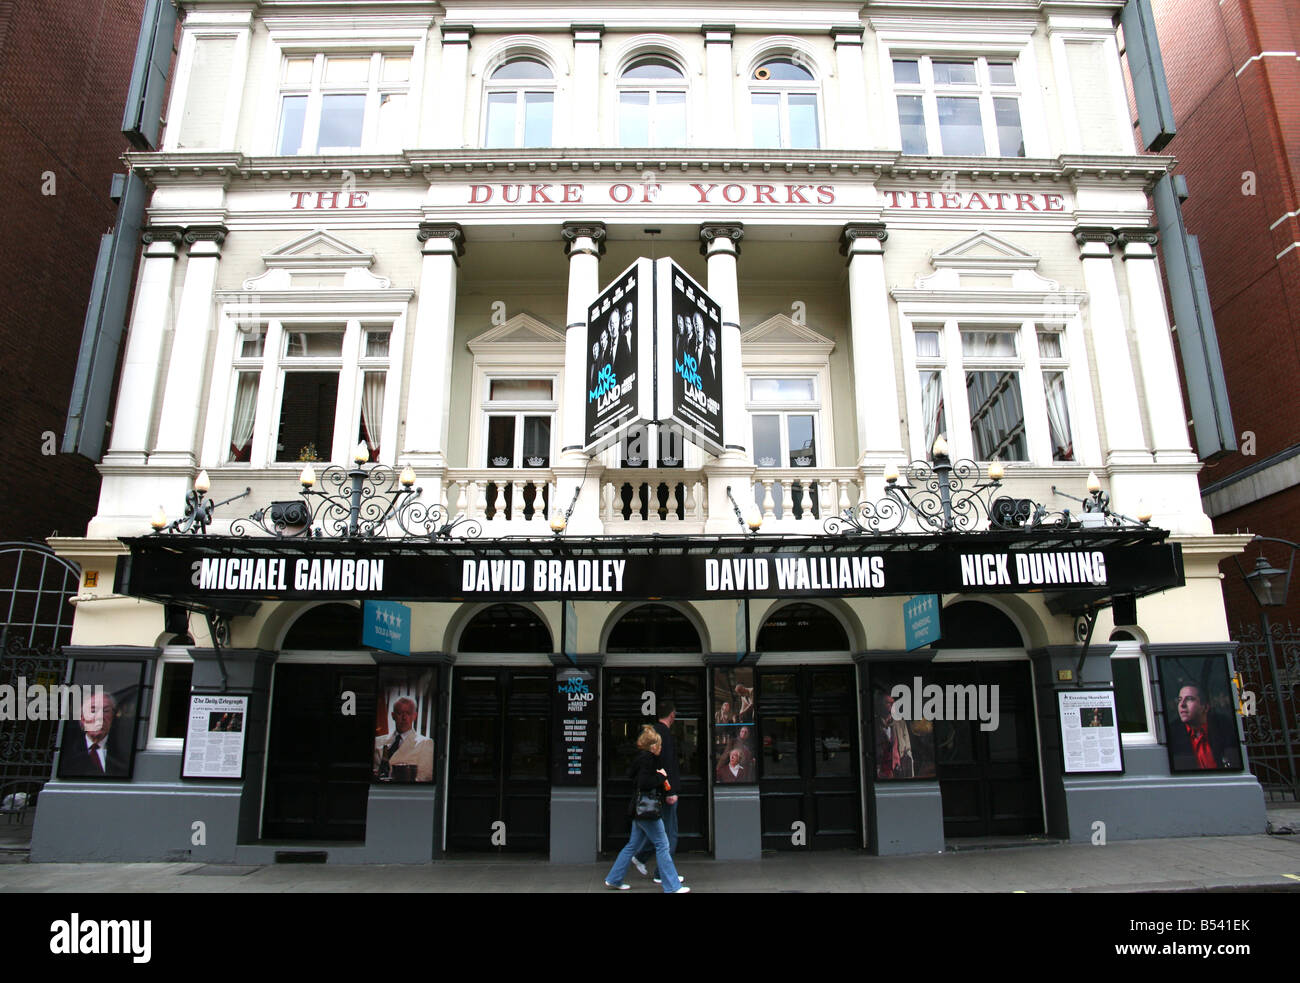 Duke of York's Theatre in London's West End Stock Photo